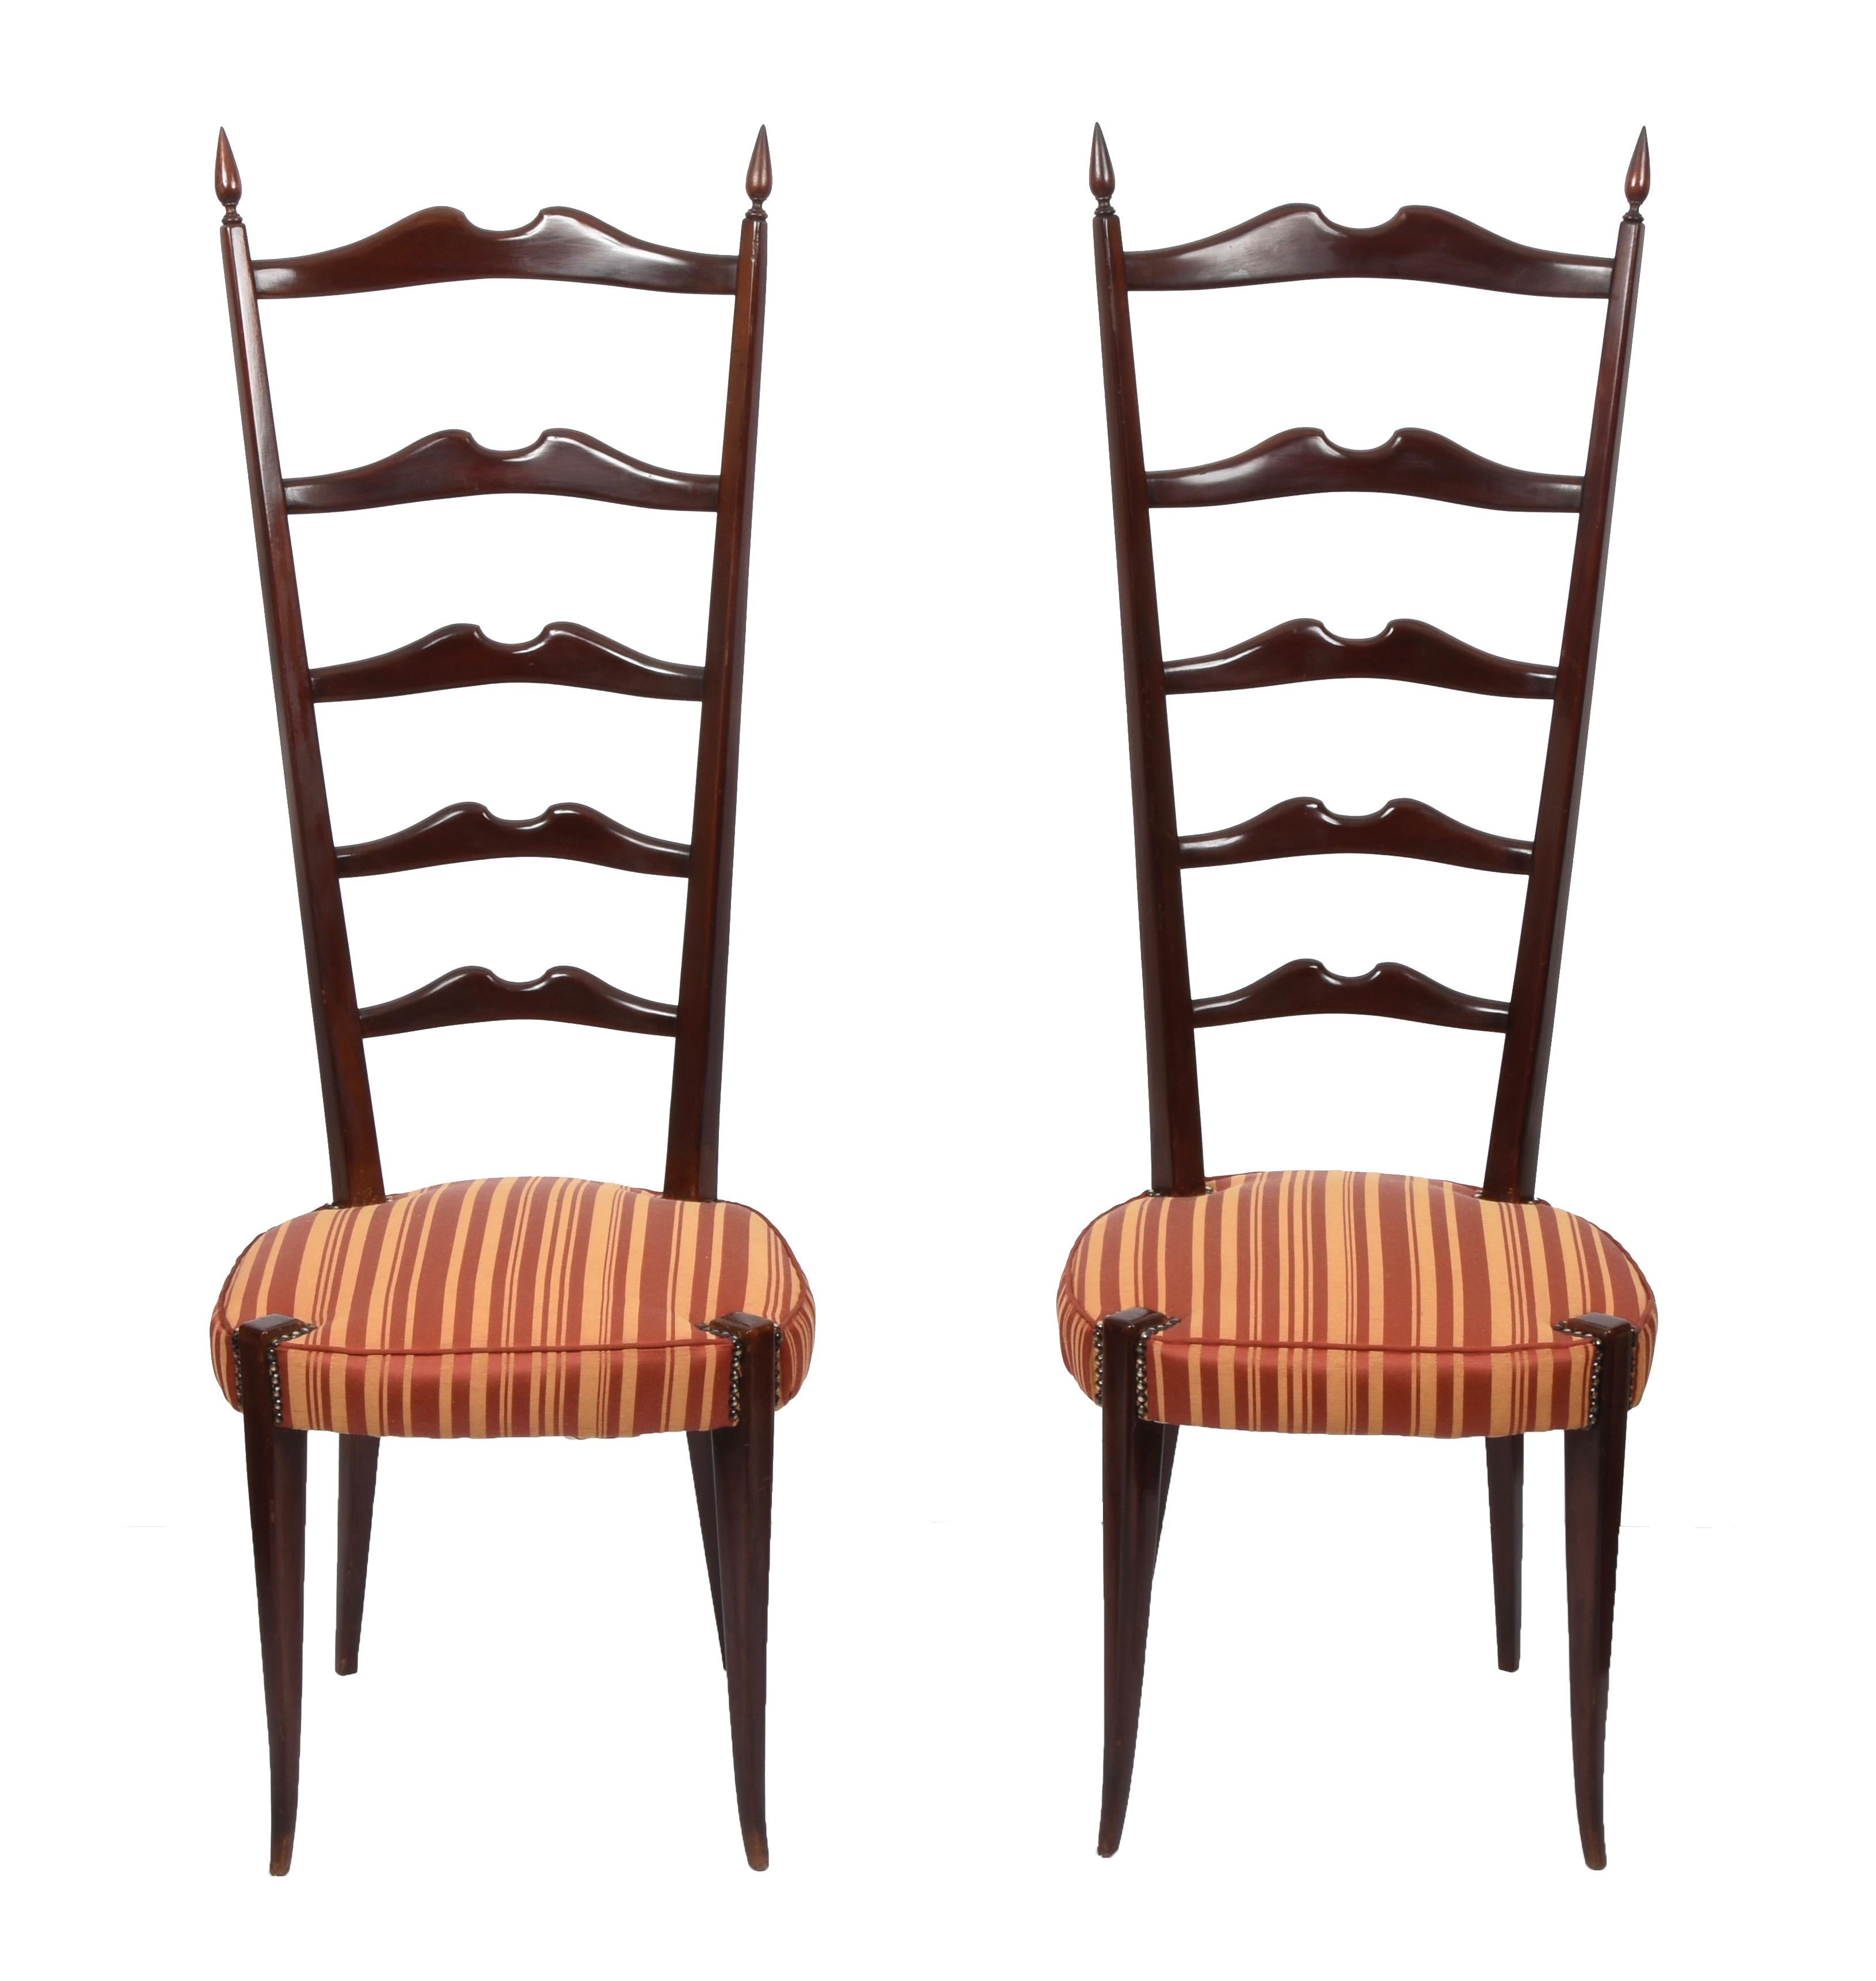 Pair of amazing high back ladder chairs in dark stained beechwood with metal spring seats and cushion. These fantastic pieces were designed by Paolo Buffa Chiavari during the 1950s in Italy.

These fantastic chairs are fantastic pieces as they